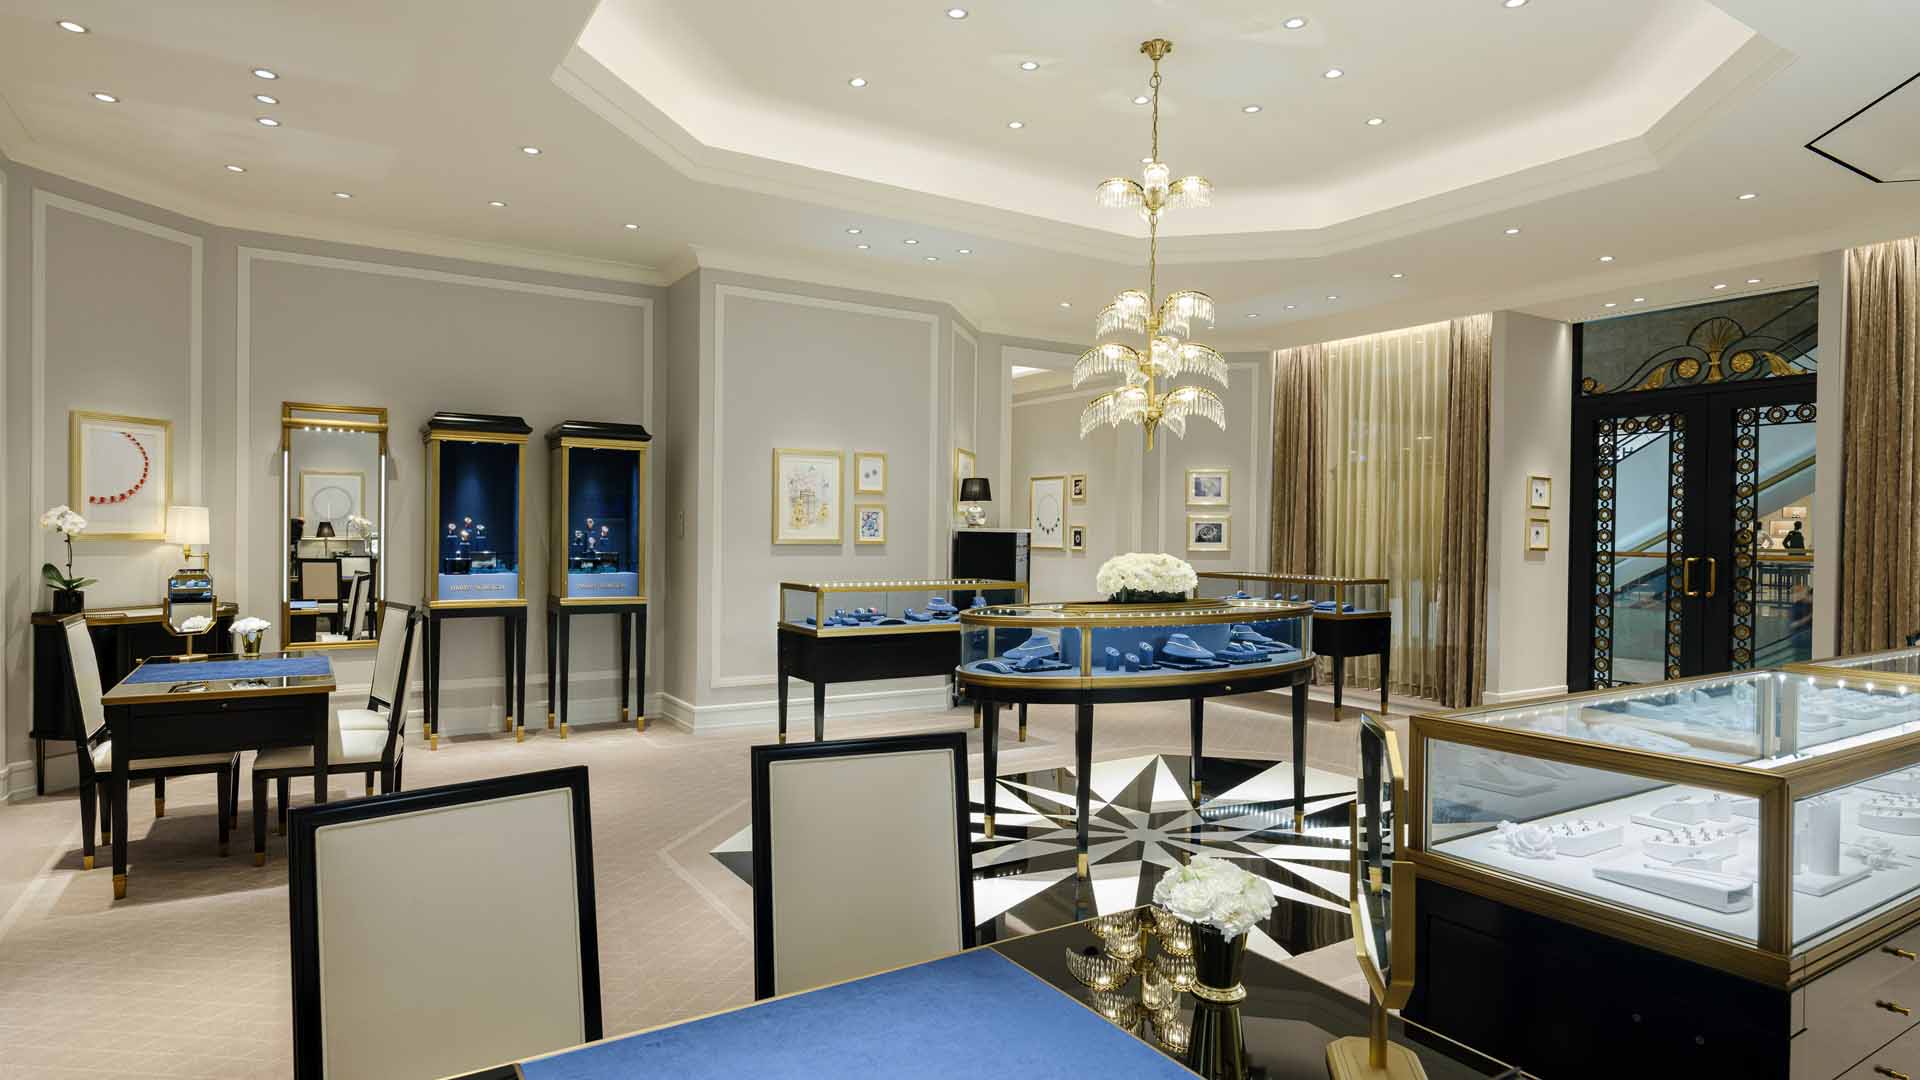 THE HOUSE OF HARRY WINSTON OPENS ITS FIRST RETAIL SALON IN NANJING